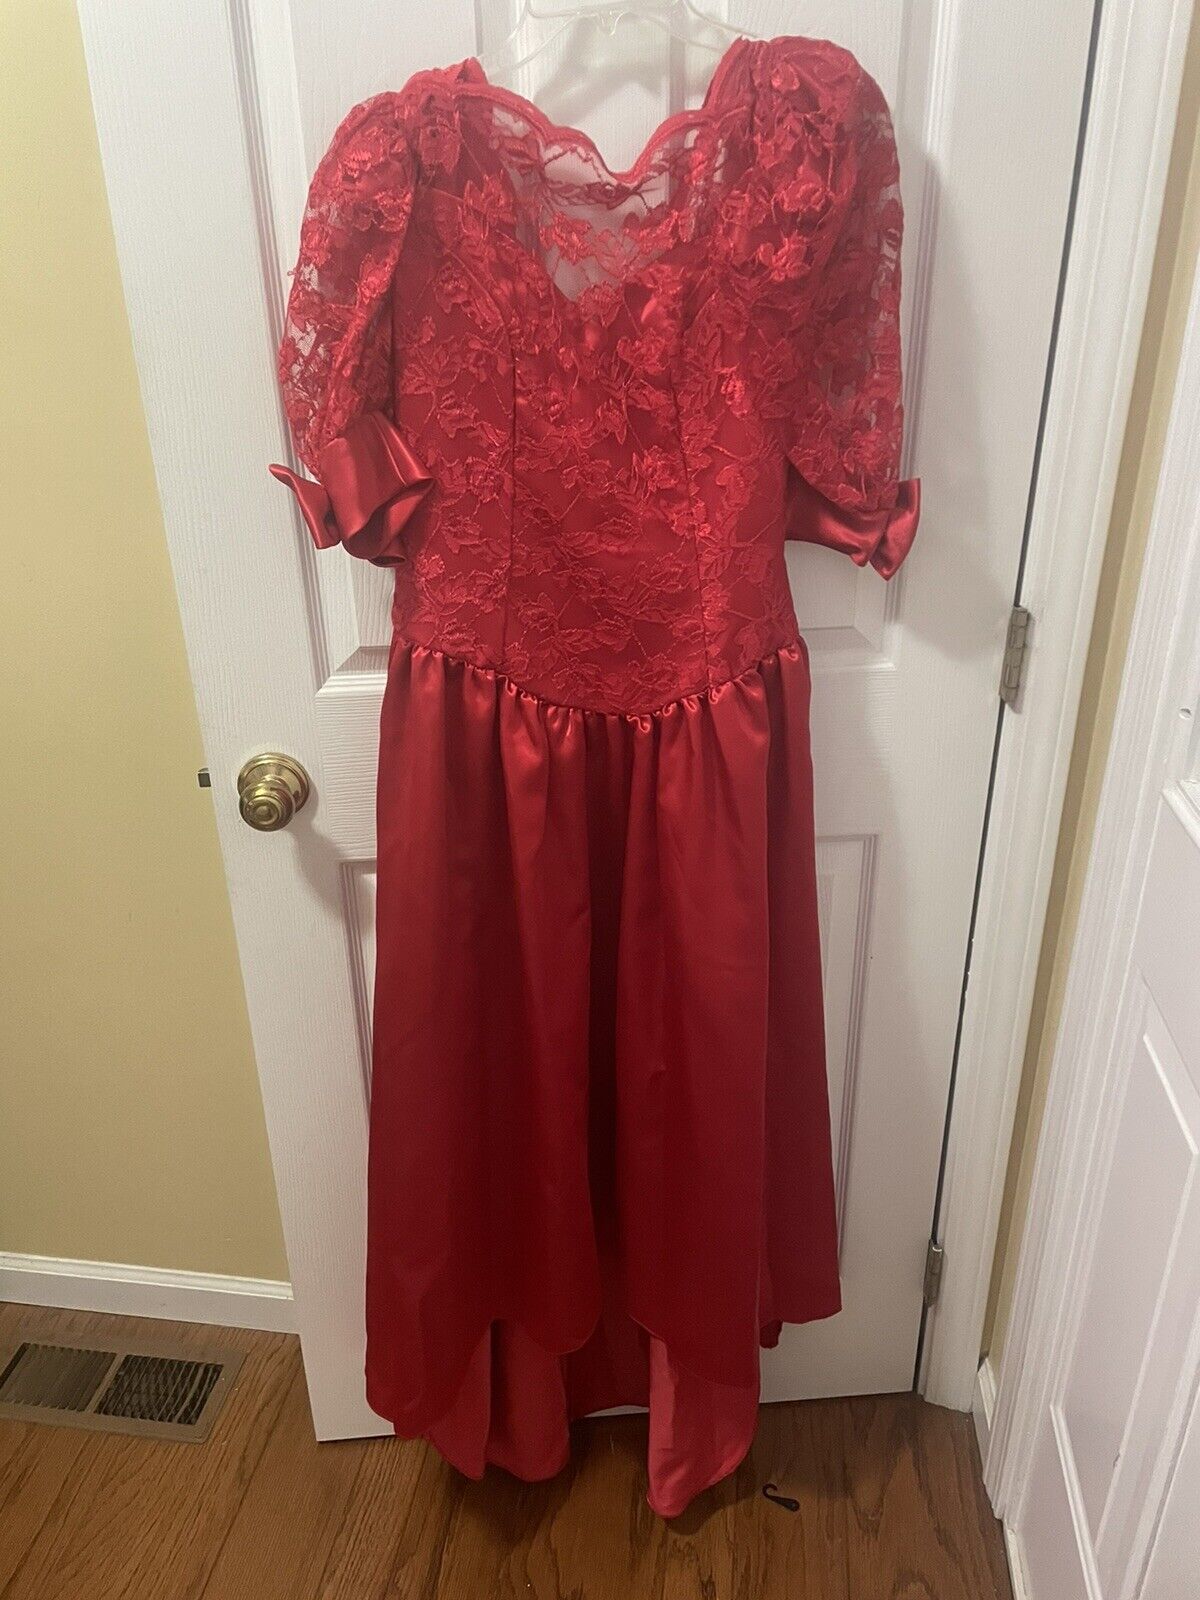 Union Made Vintage 80s Red Satin Party Free shipping / New All items free shipping Bridesmaid Dres Lace Prom